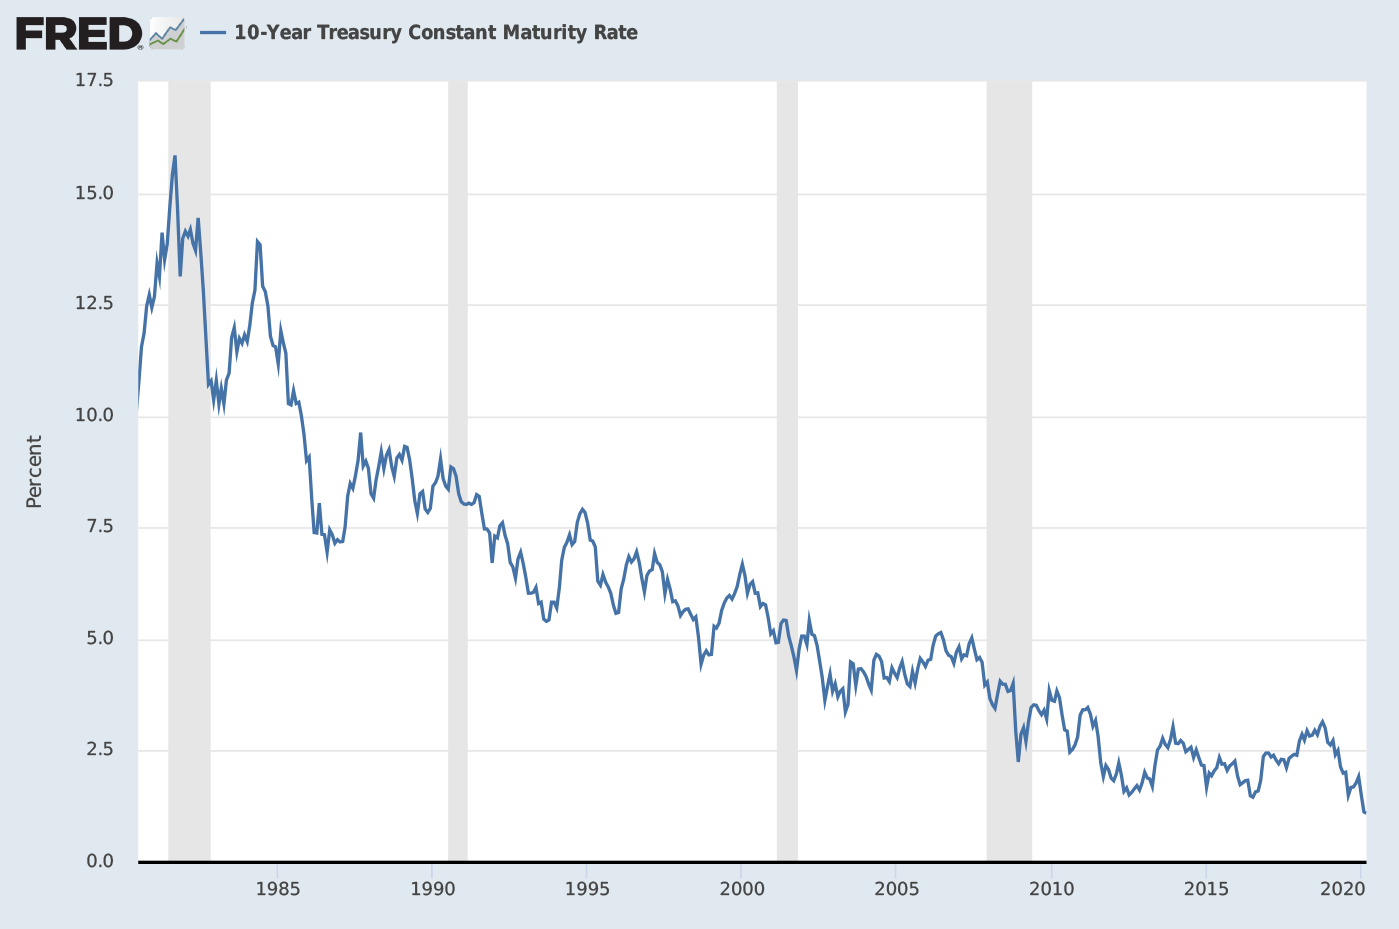 Source: Federal Reserve Economic Data, “10-Year Treasury Constant Maturity Rate” (March 3, 2020) available at https://fred.stlouisfed.org/series/DGs10.<br />Note: Shaded areas are recessions.